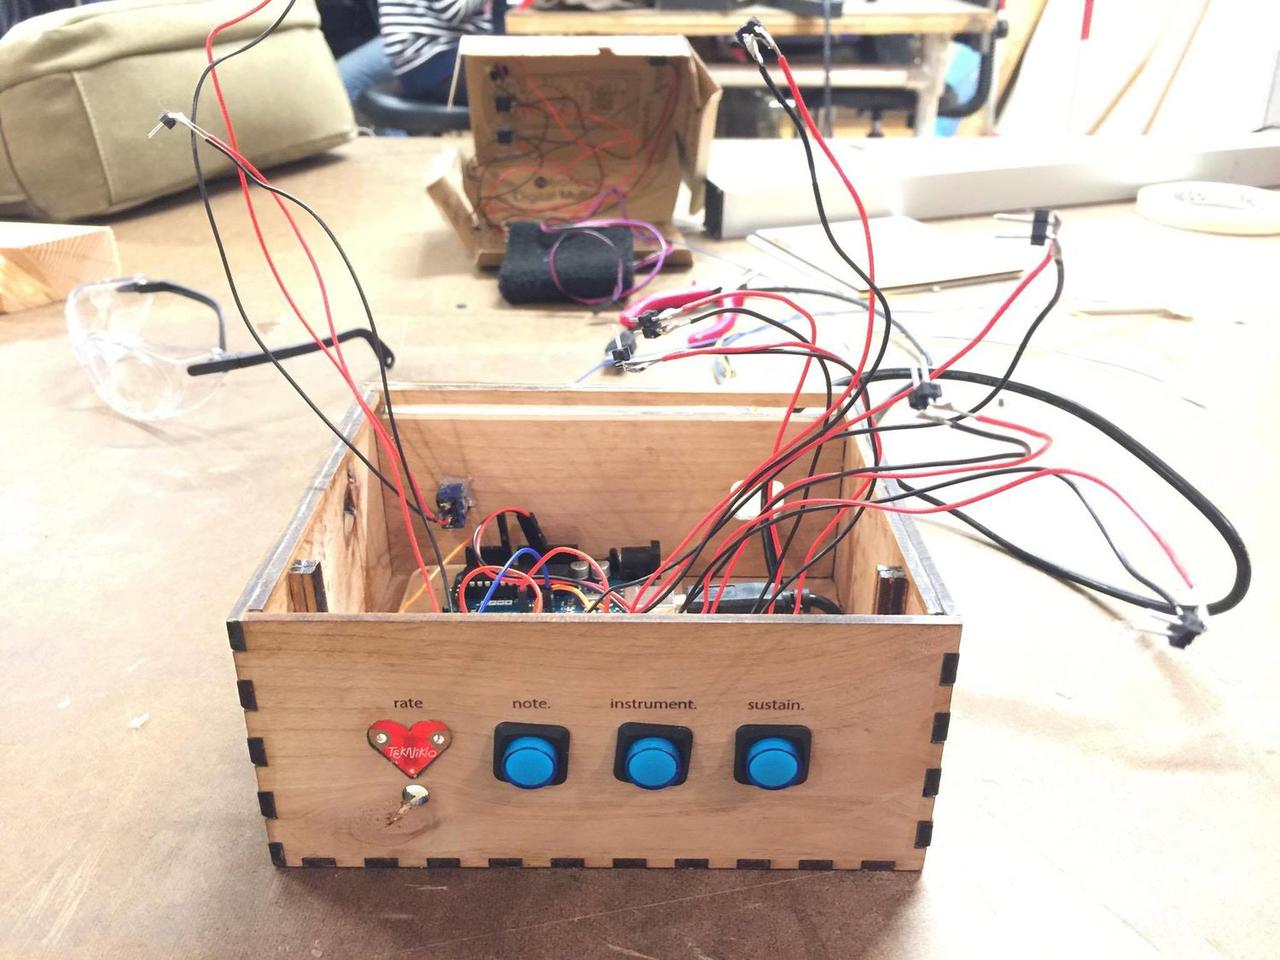 Wooden box sitting on table with button wires sticking out of it